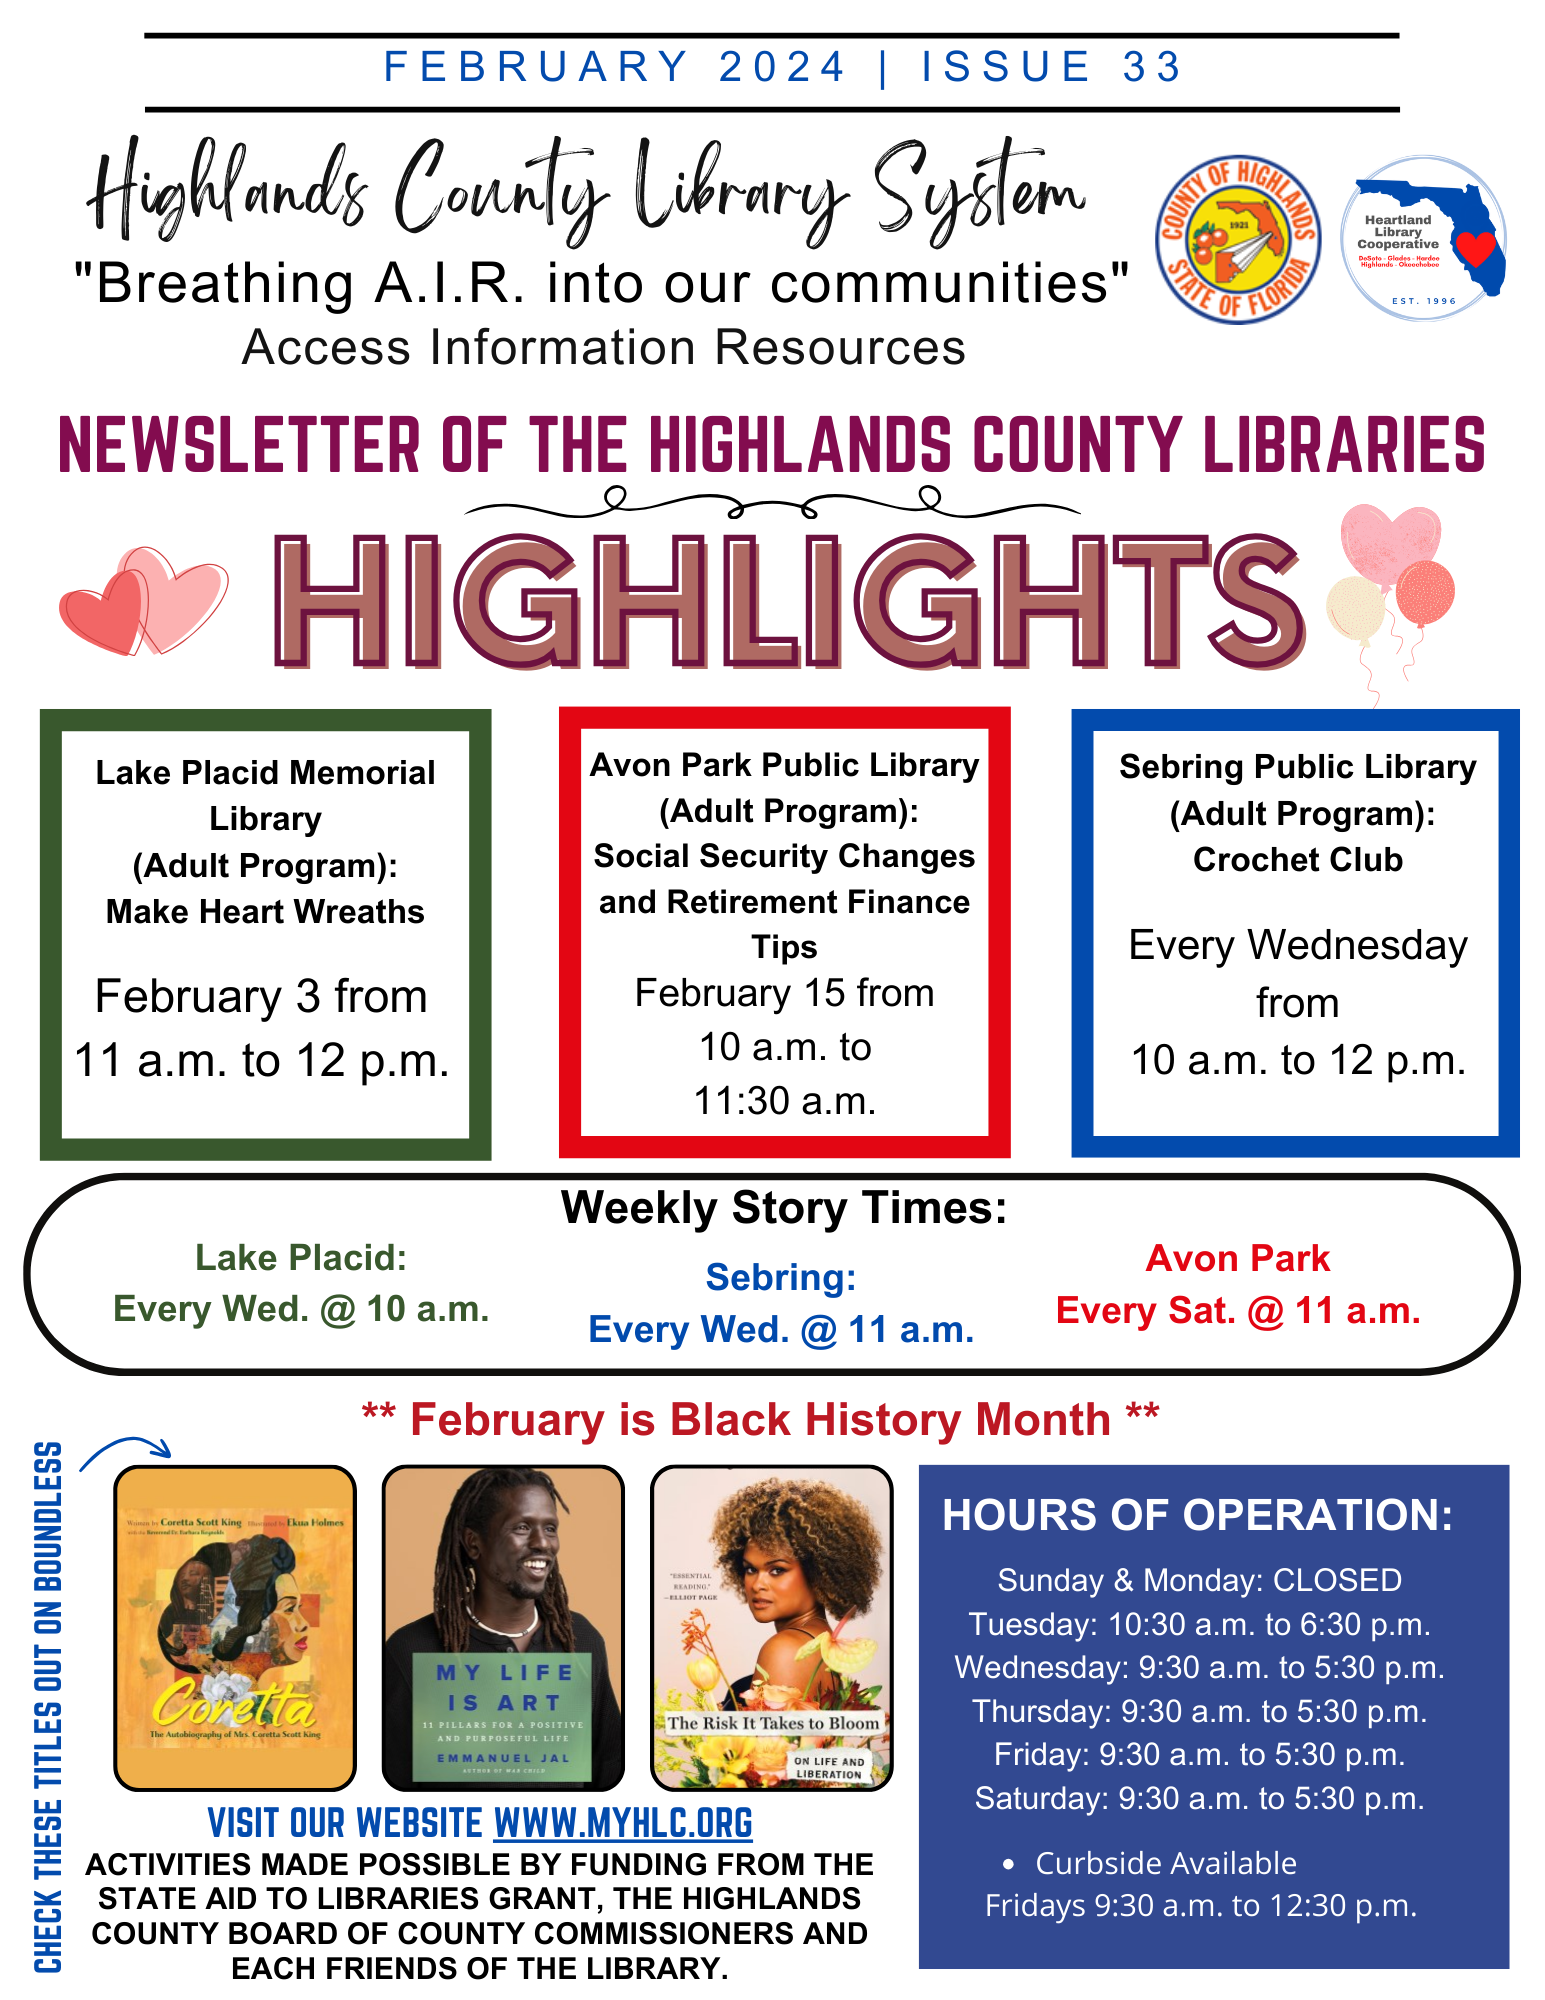 Image of page 1 of the February newsletter